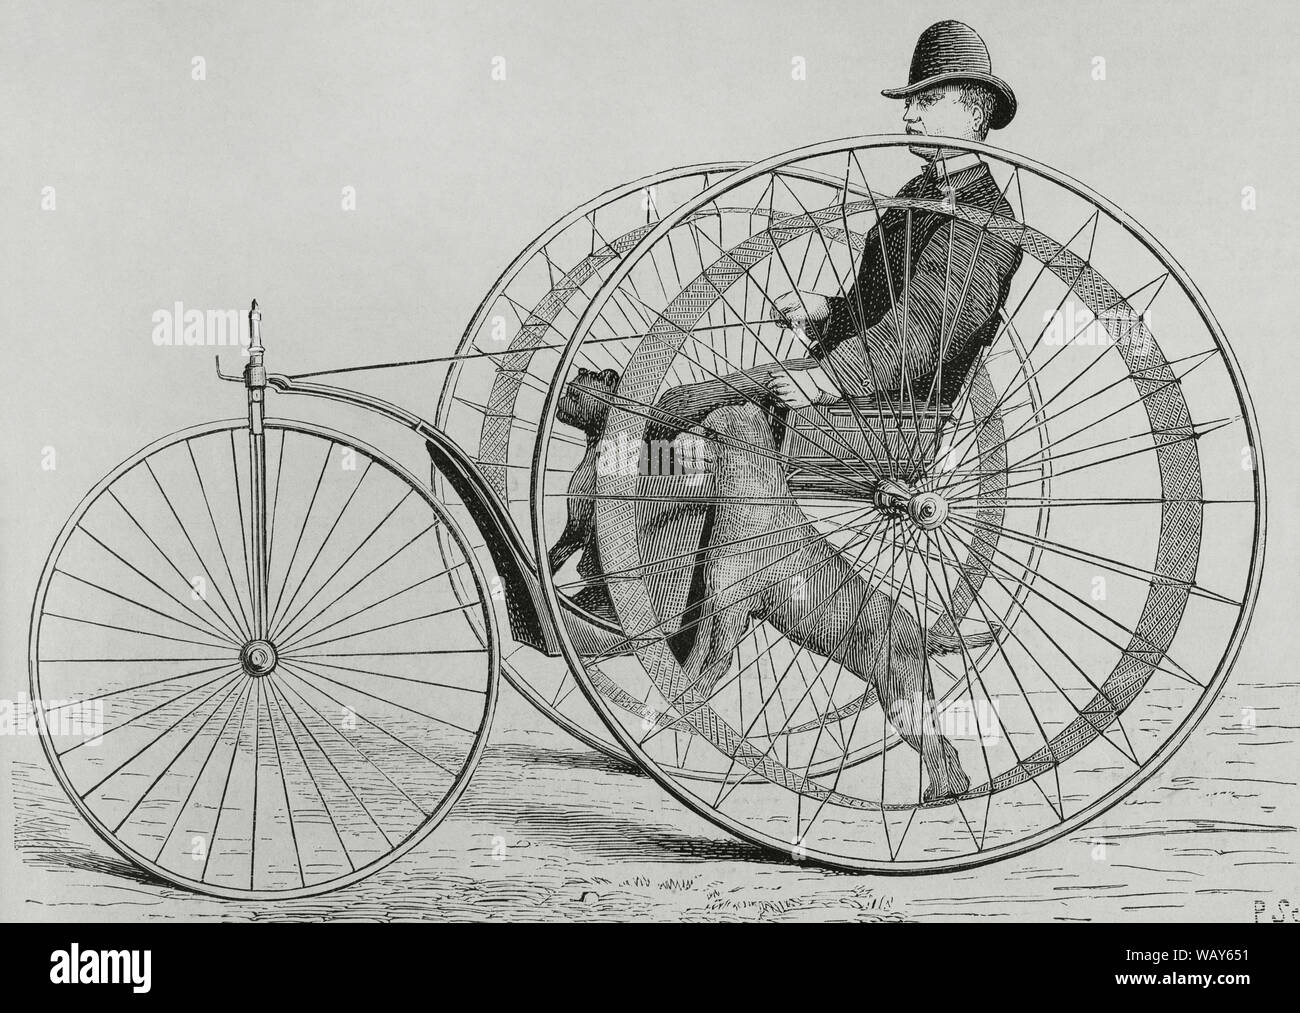 The 'Cynophere', or dog-powered velocipede. It was invented by the French mechanic M. Huret and patented on December 14, 1875. It consisted of a three-wheeled vehicle, a kind of tricycle, weighing 80 kilograms and was moved by two dogs placed on the inner wheels simulating walk . It reached a speed of 10 kilometers per hour. Two vehicles were presented at the Universal Exhibition at Philadelphia (Pennsylvania, United States) in 1876. Engraving. La Ilustracion Española y Americana, June 15, 1876. Stock Photo